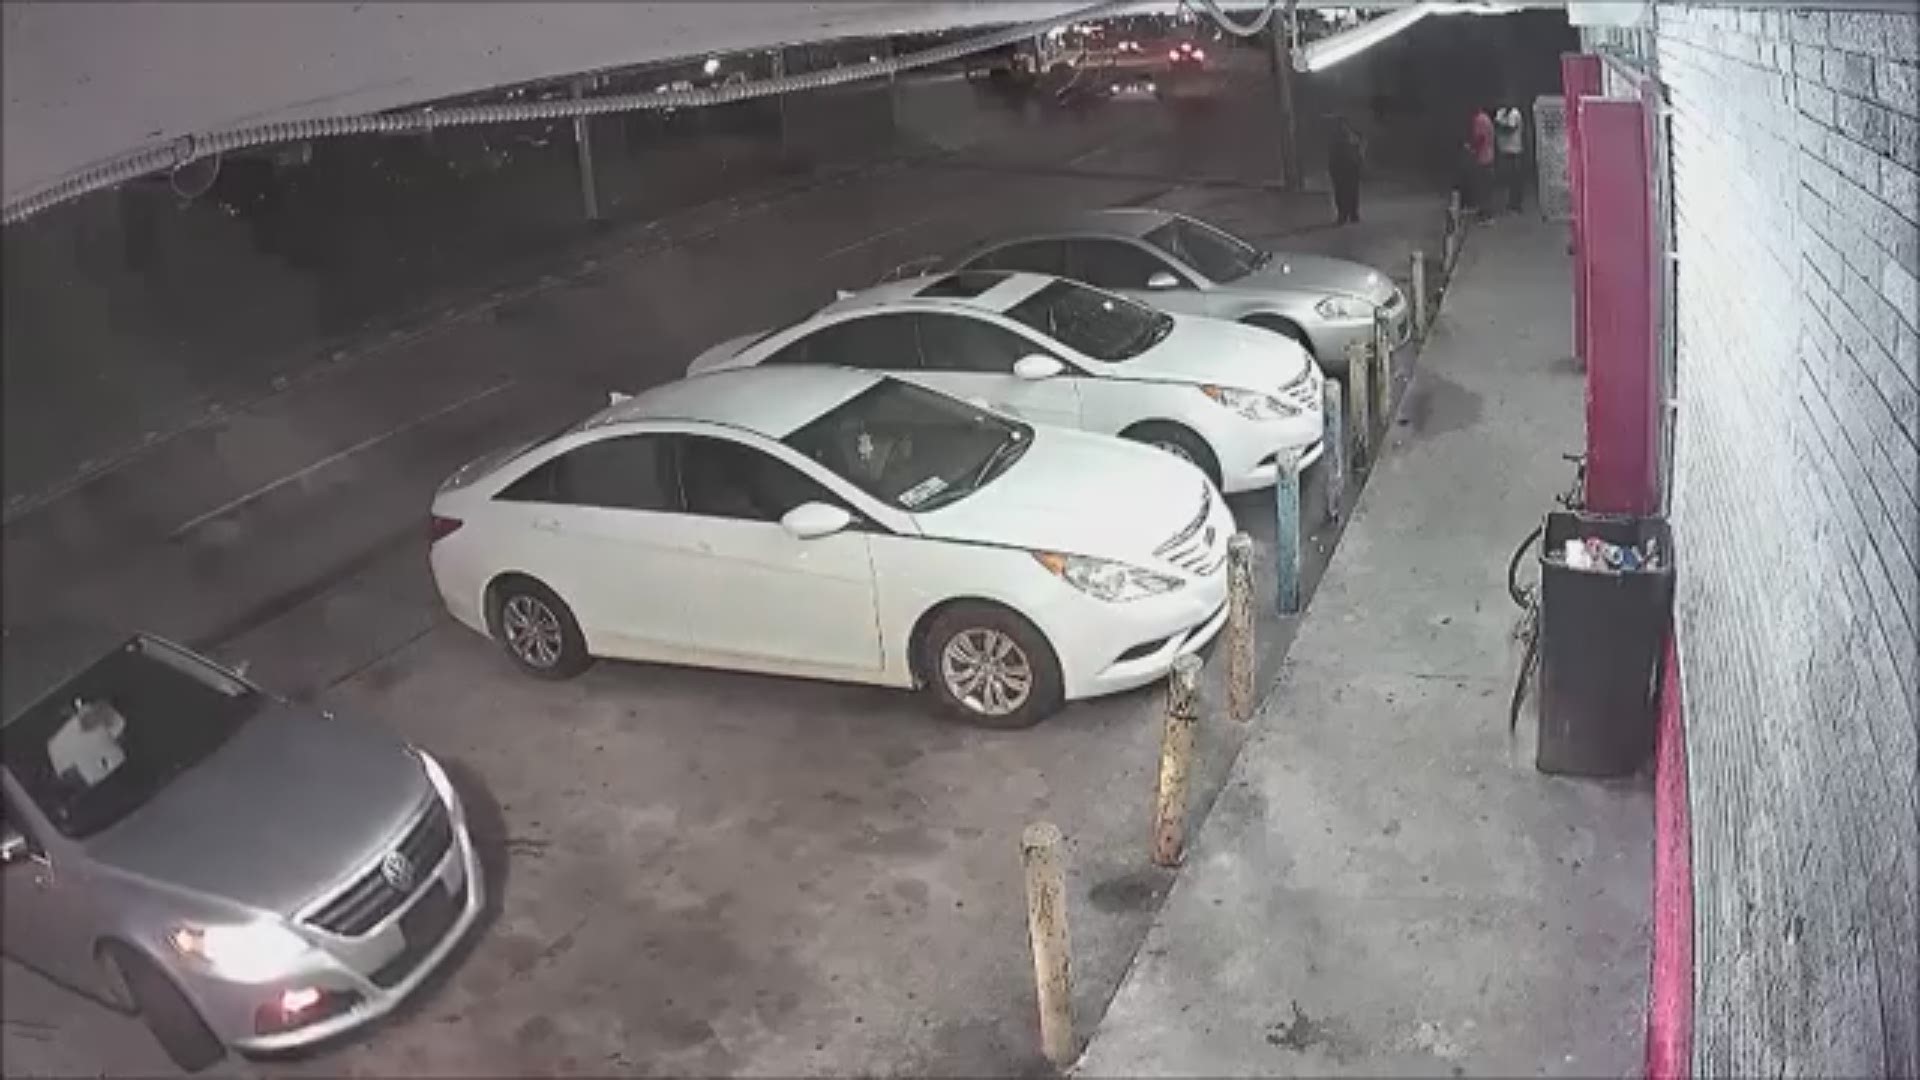 Viewer discretion advised. Houston police have released surveillance video and photos of three suspects wanted in the fatal shooting of a man at 3014 Scott Street about 12:10 a.m. on September 2